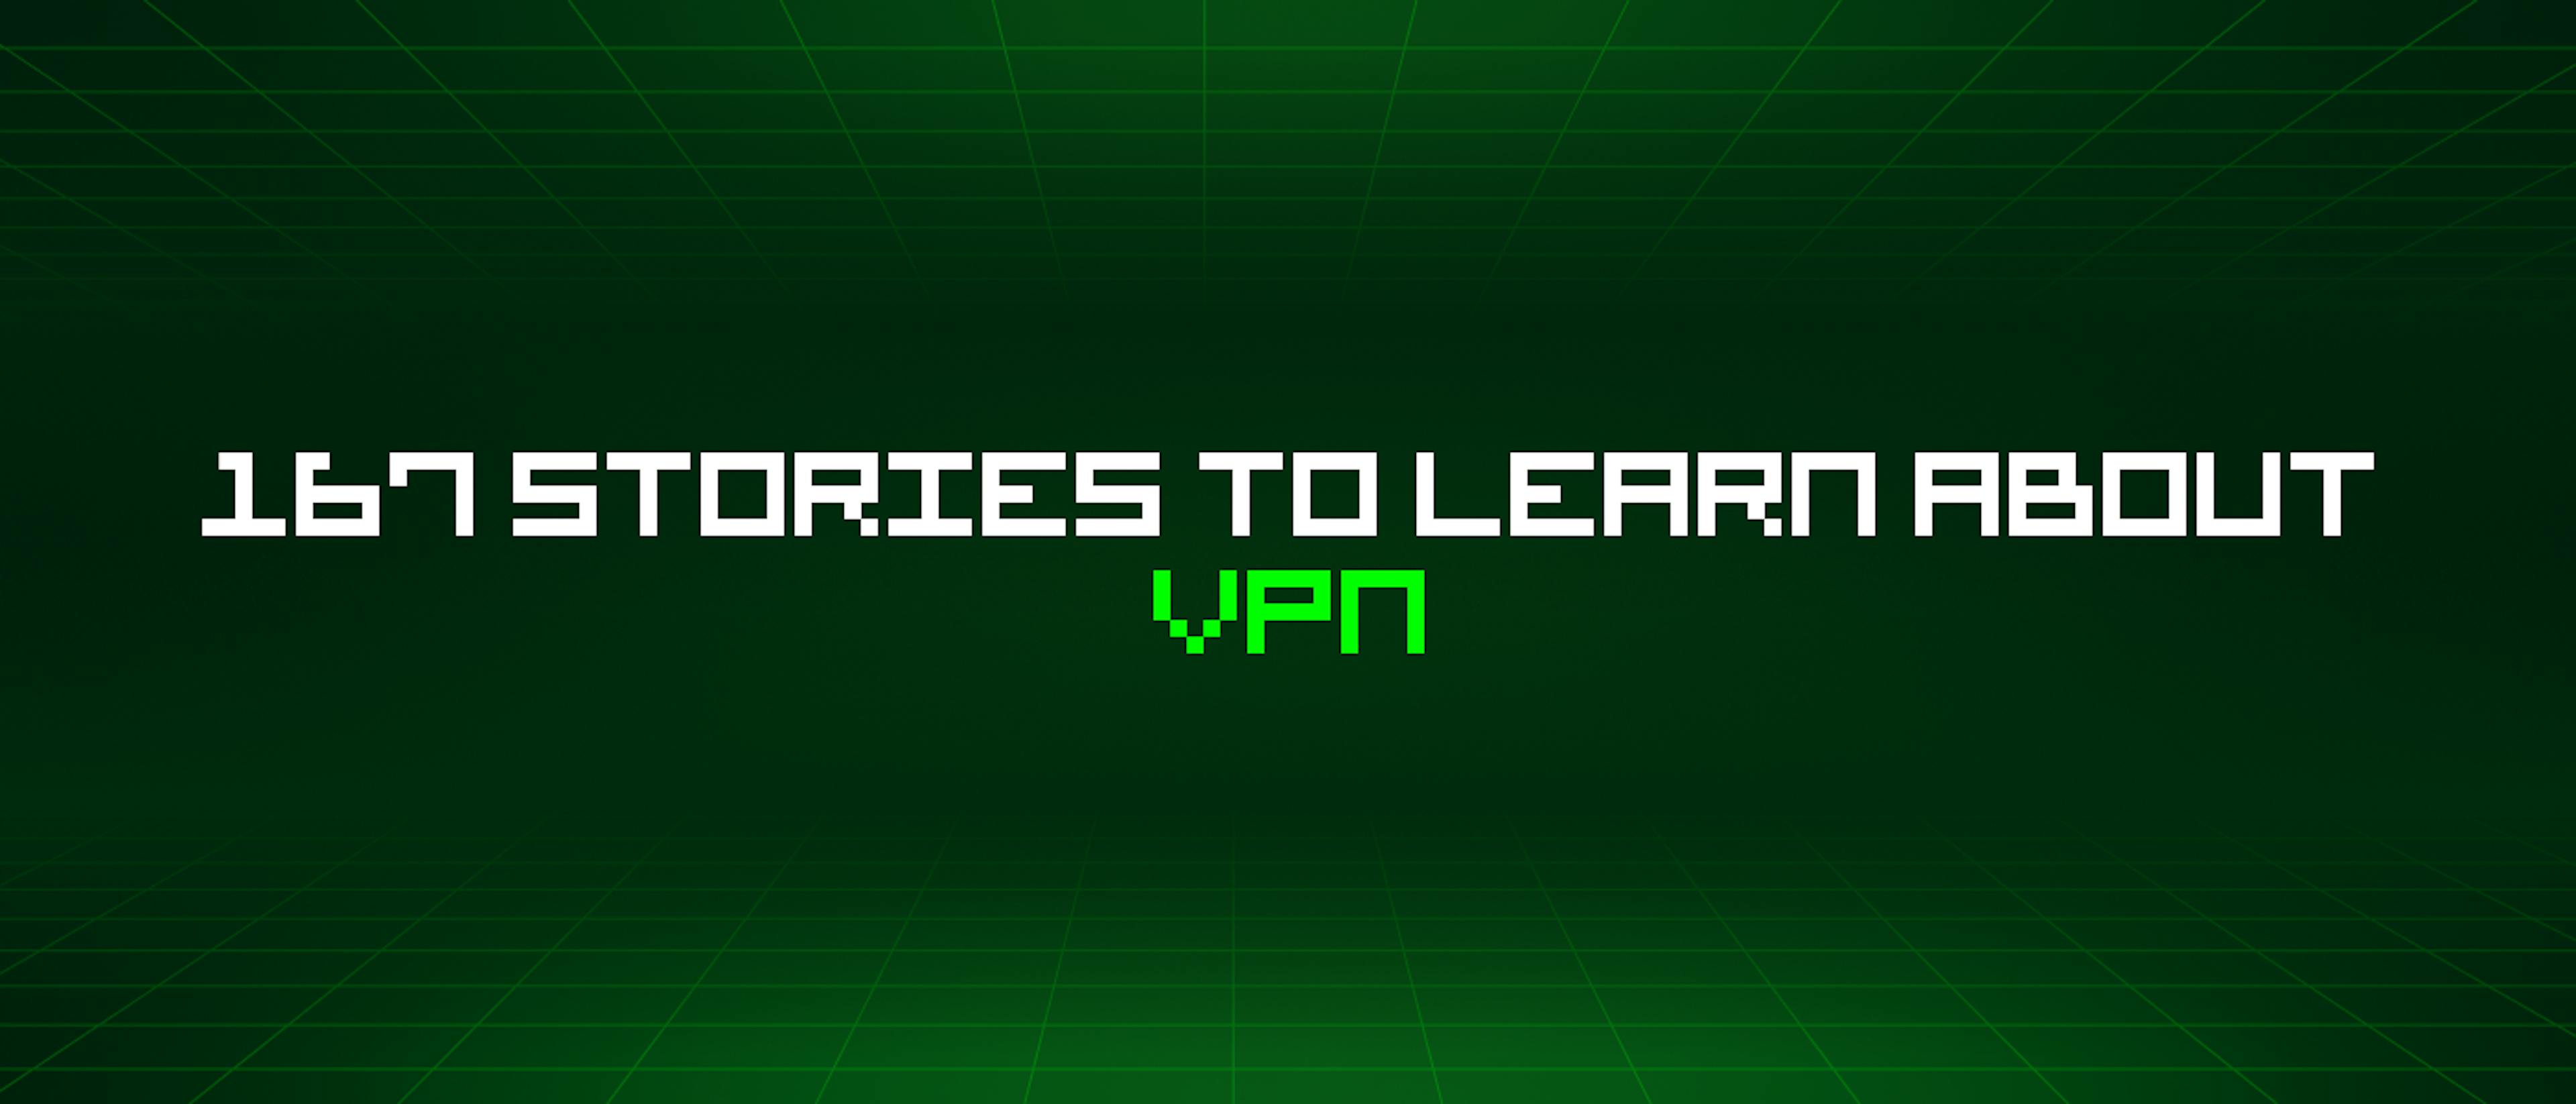 featured image - 167 Stories To Learn About Vpn